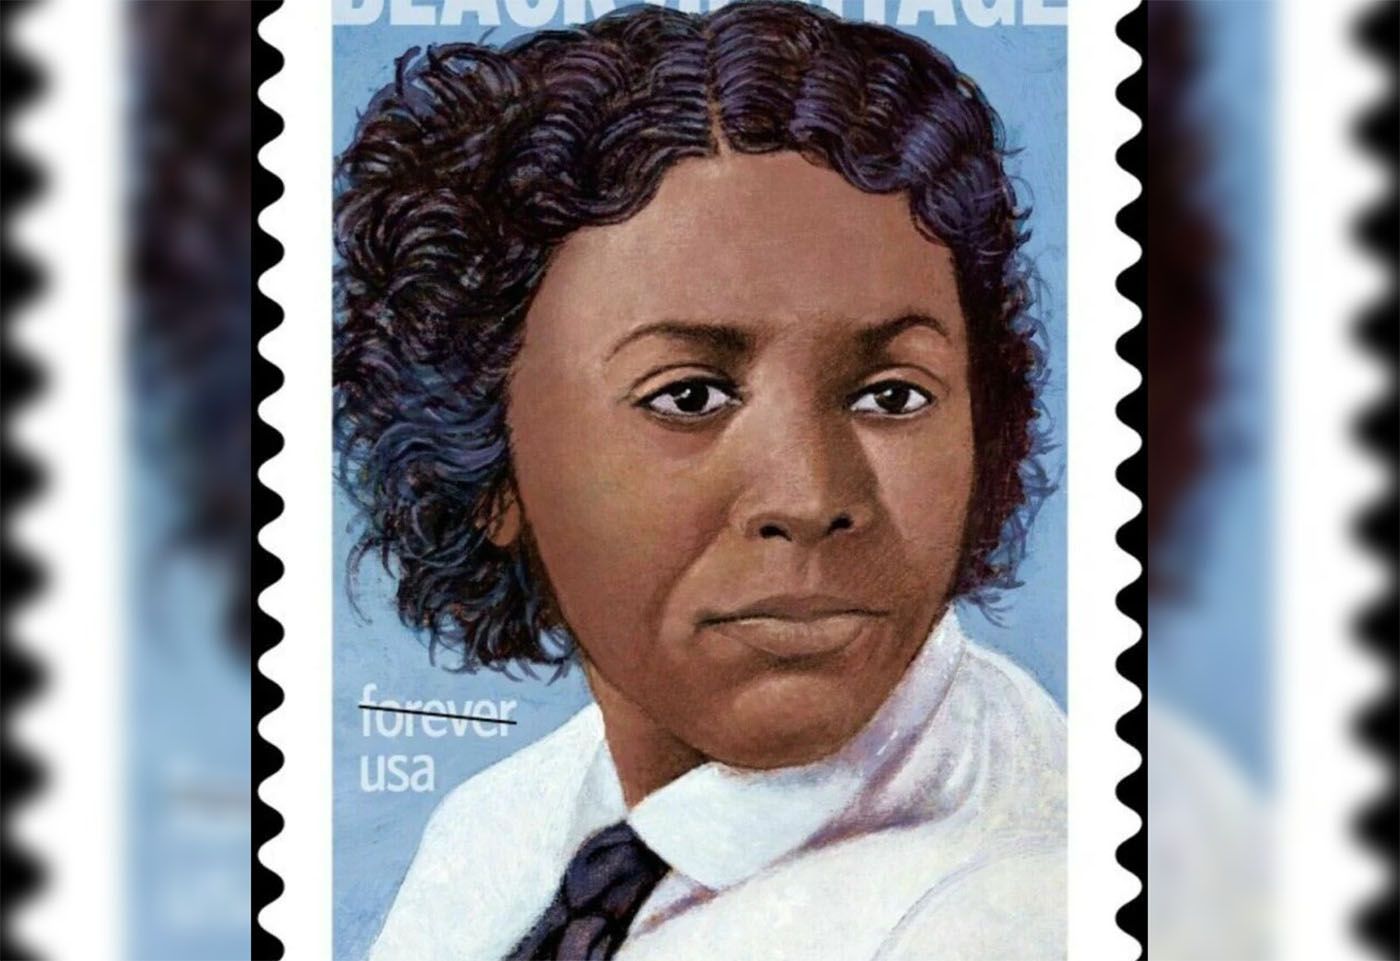 U.S. Postage Stamp Will Honor Edmonia Lewis, a Sculptor Who Broke the Mold, Smart News